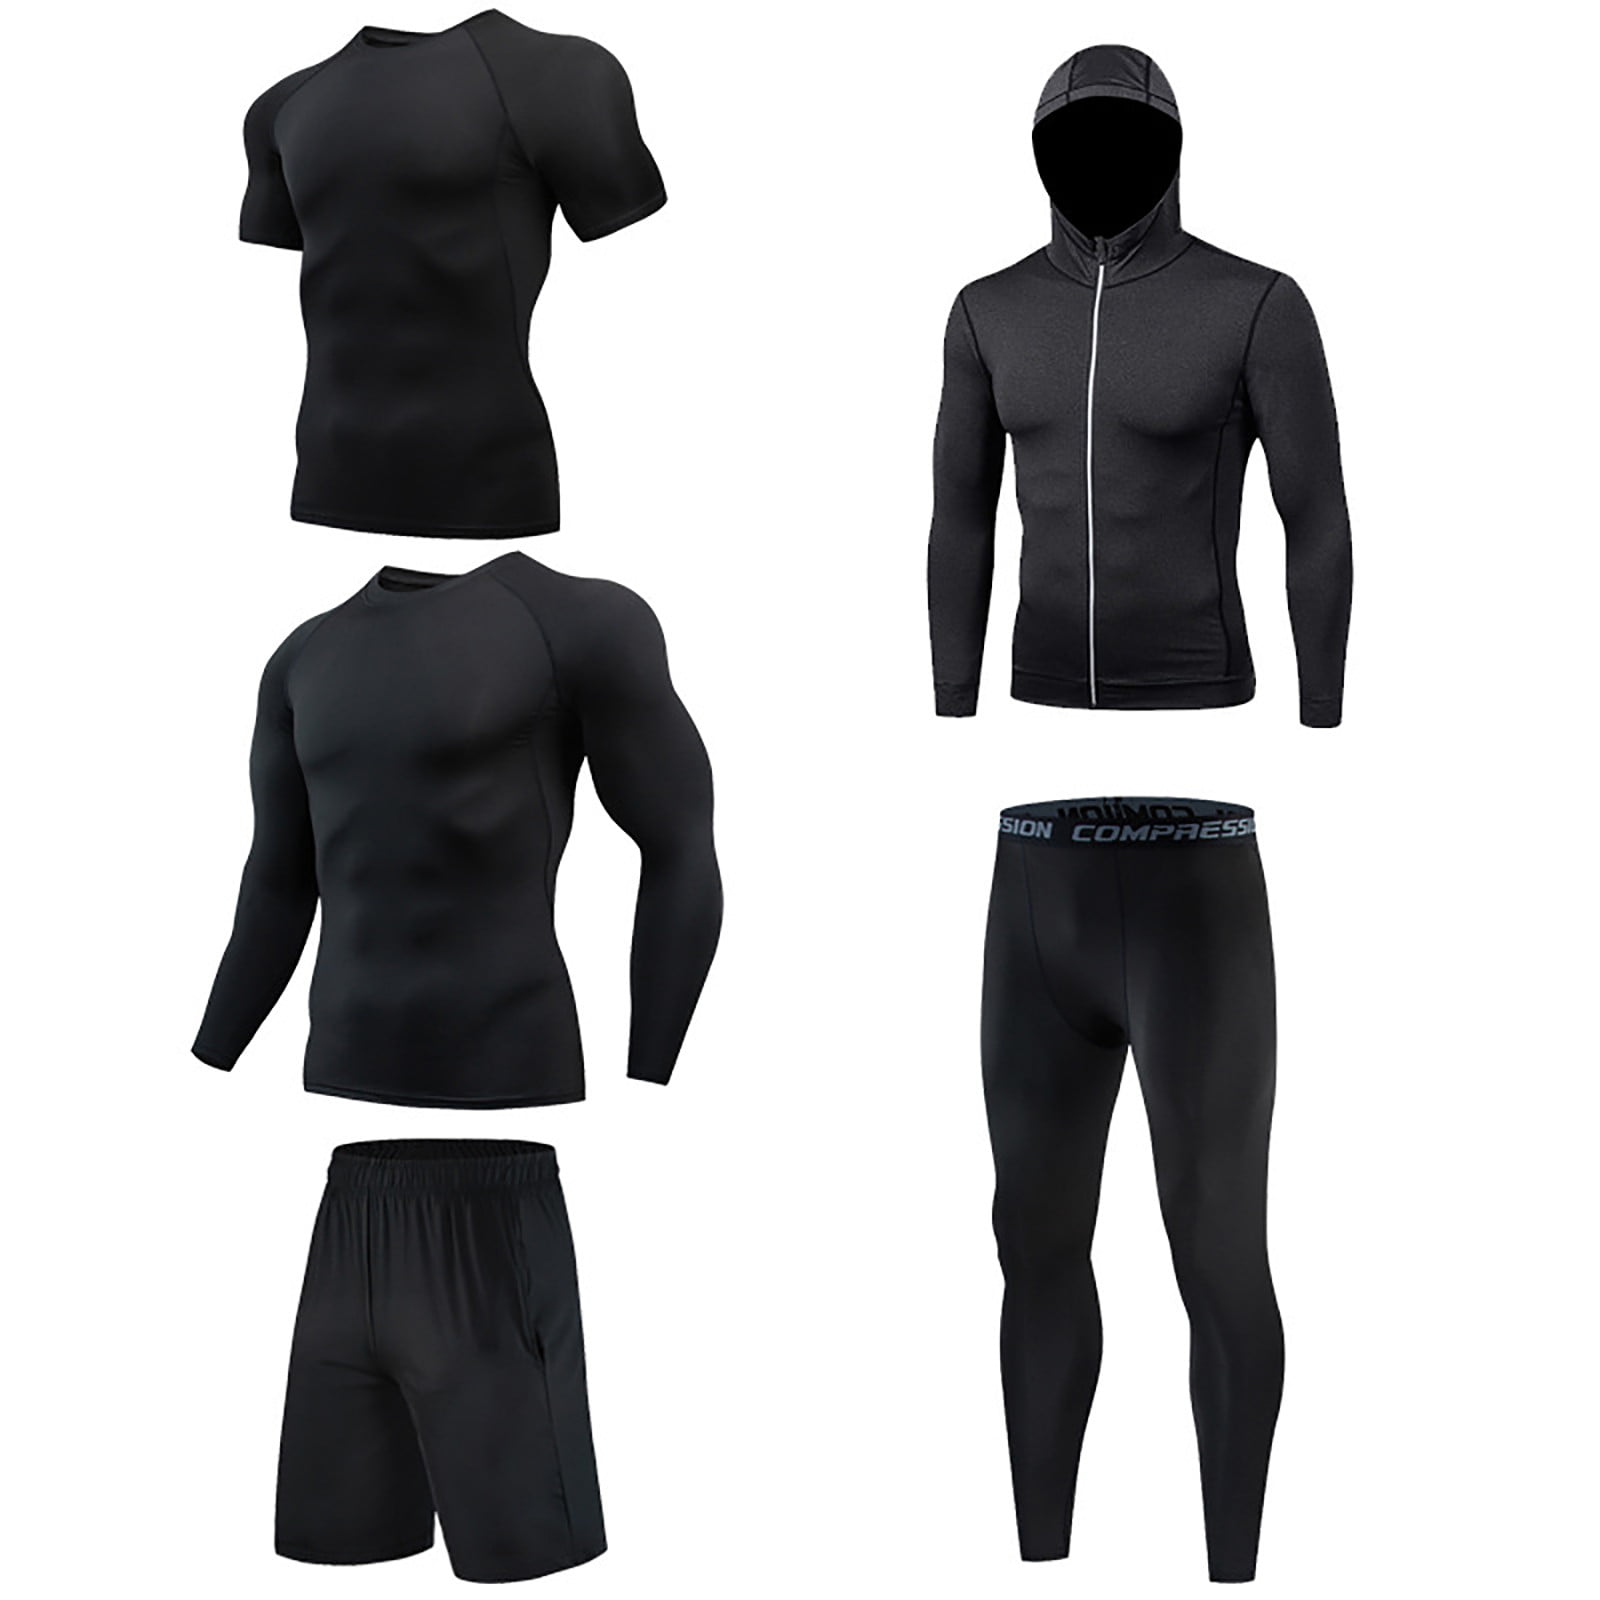 SOOMLON Men Workout Set Dry Quick Shirt Pants Clothes for Gym Going out  Pants Quick Drying Fitness 5 Piece Jacket + Long Sleeve + Short Sleeve +